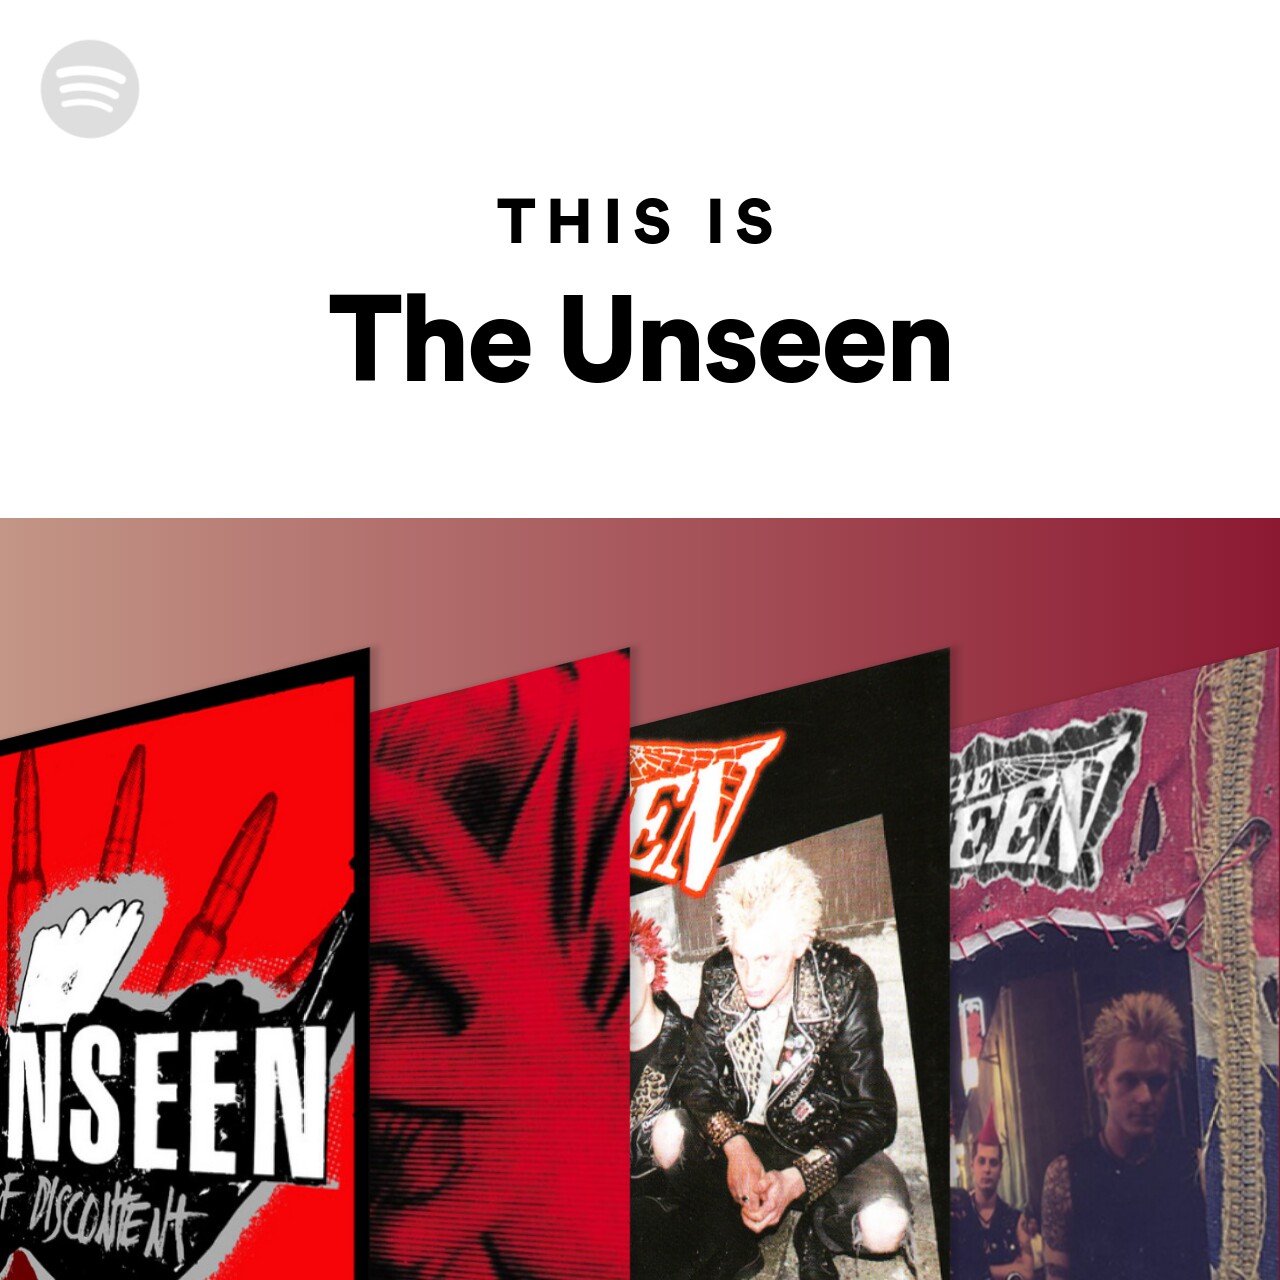 This Is The Unseen